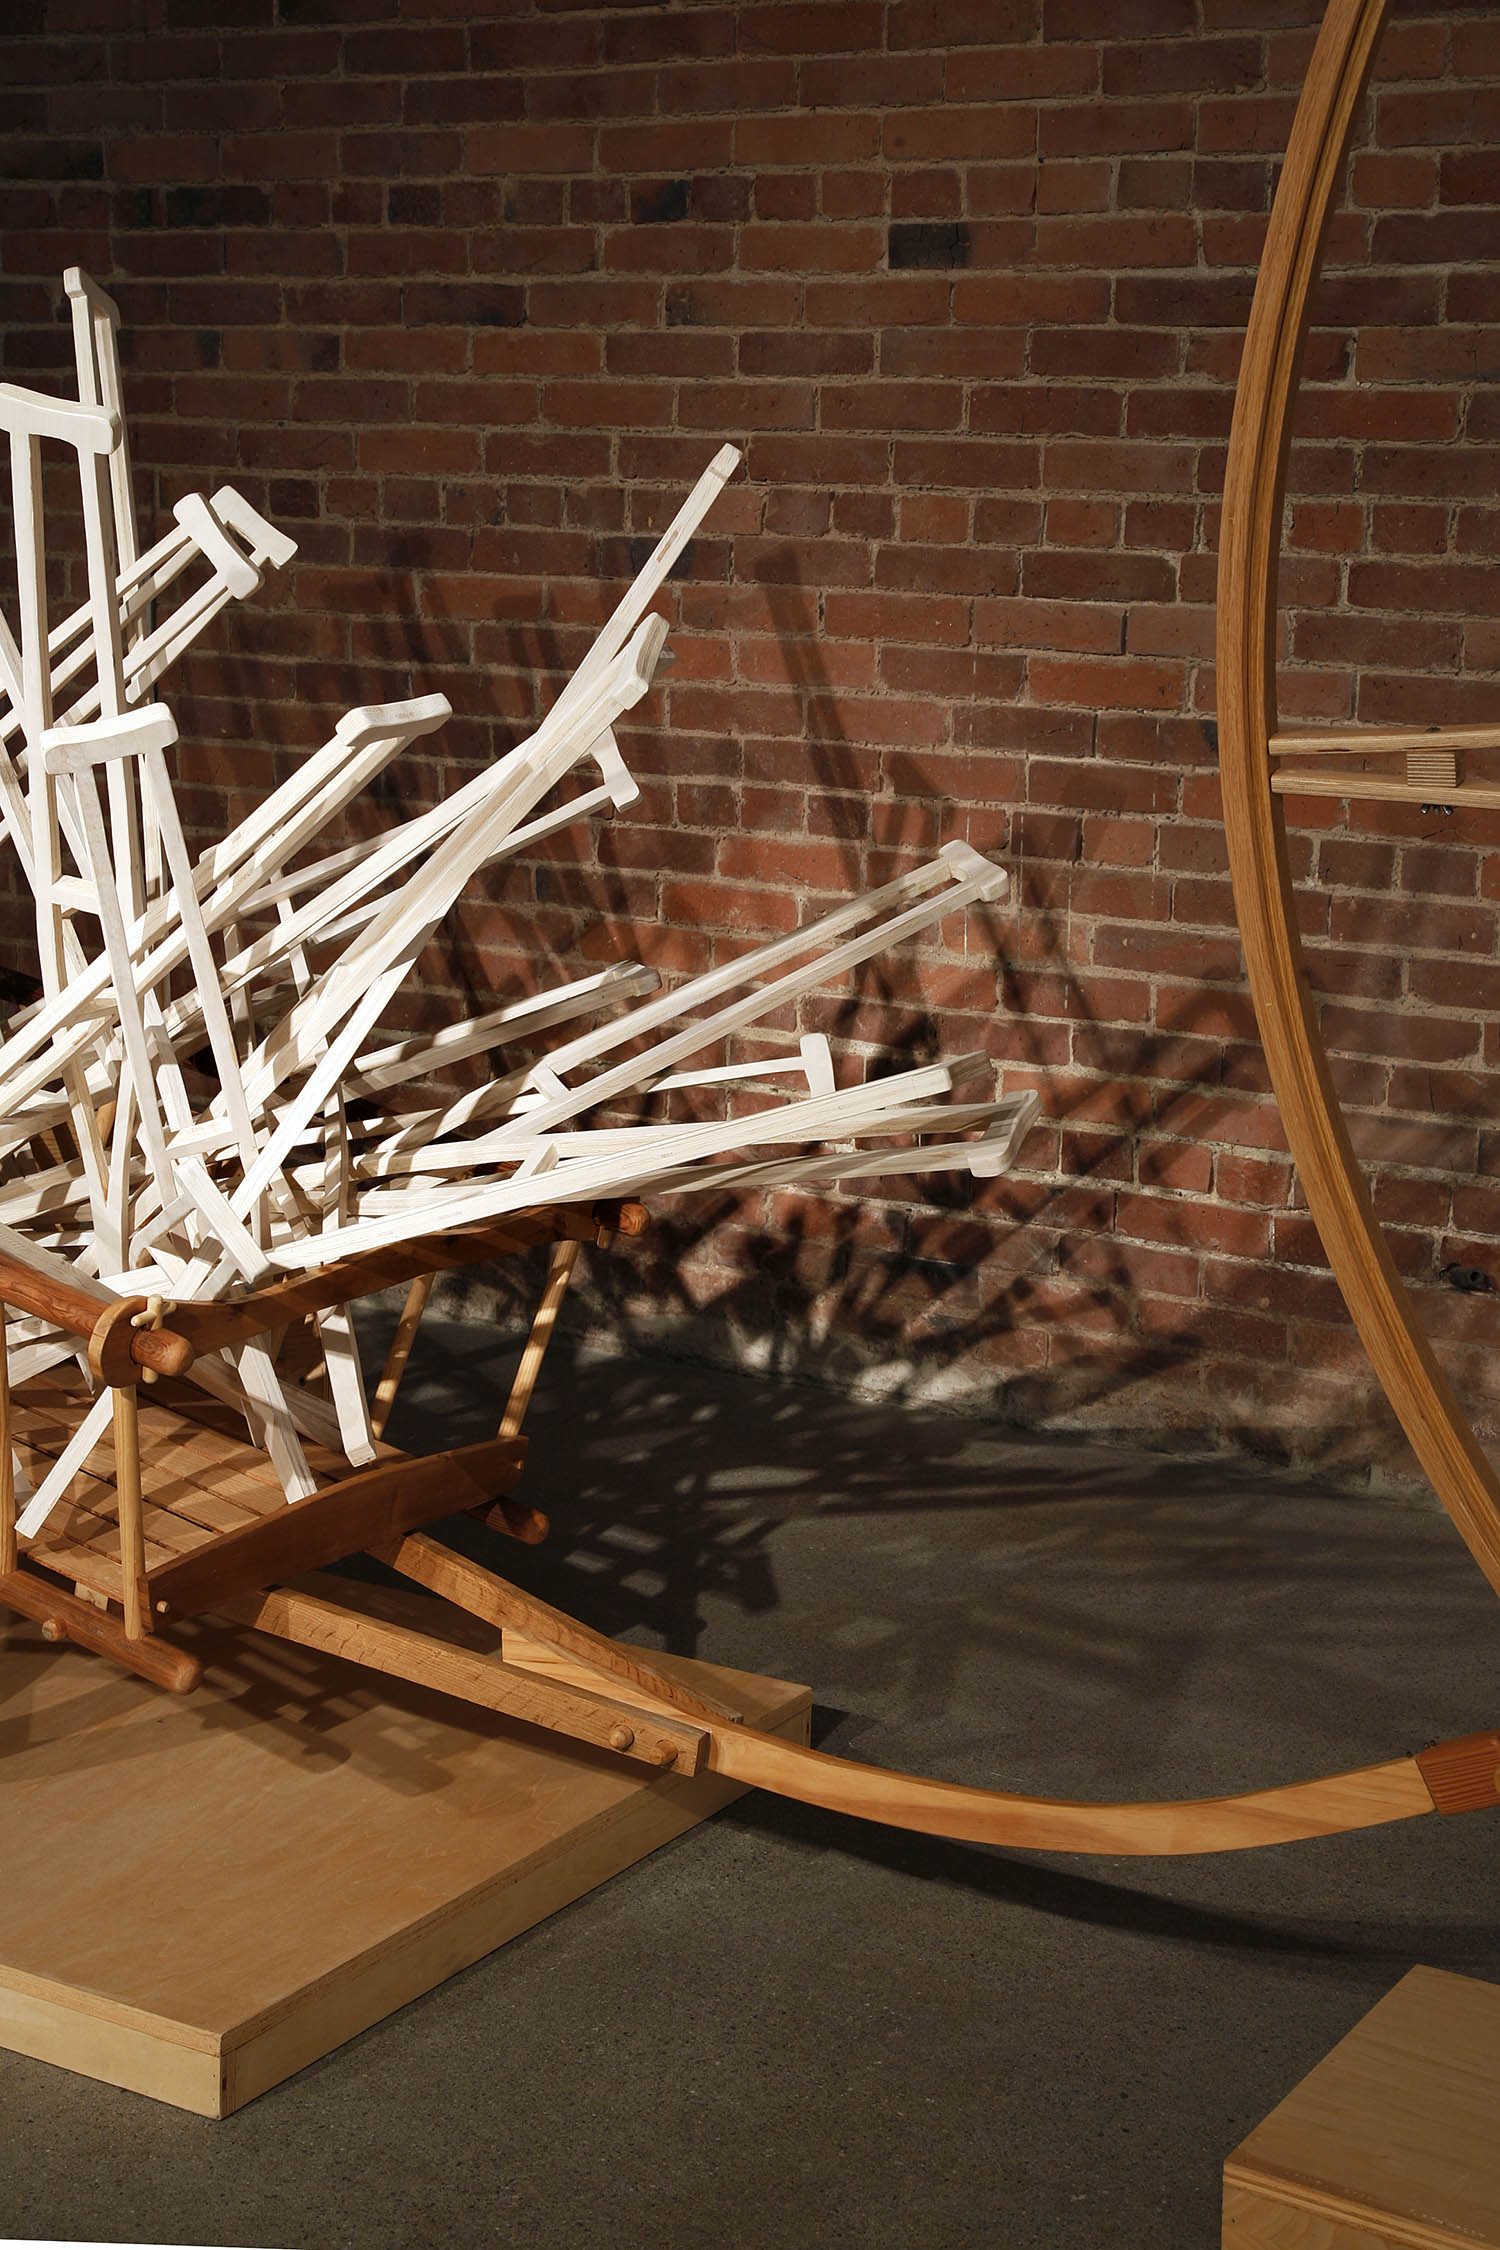 "Fade" (detail view), 2015, 8' h x 15' w x 3' d, wood, stain; © Tom Gormally